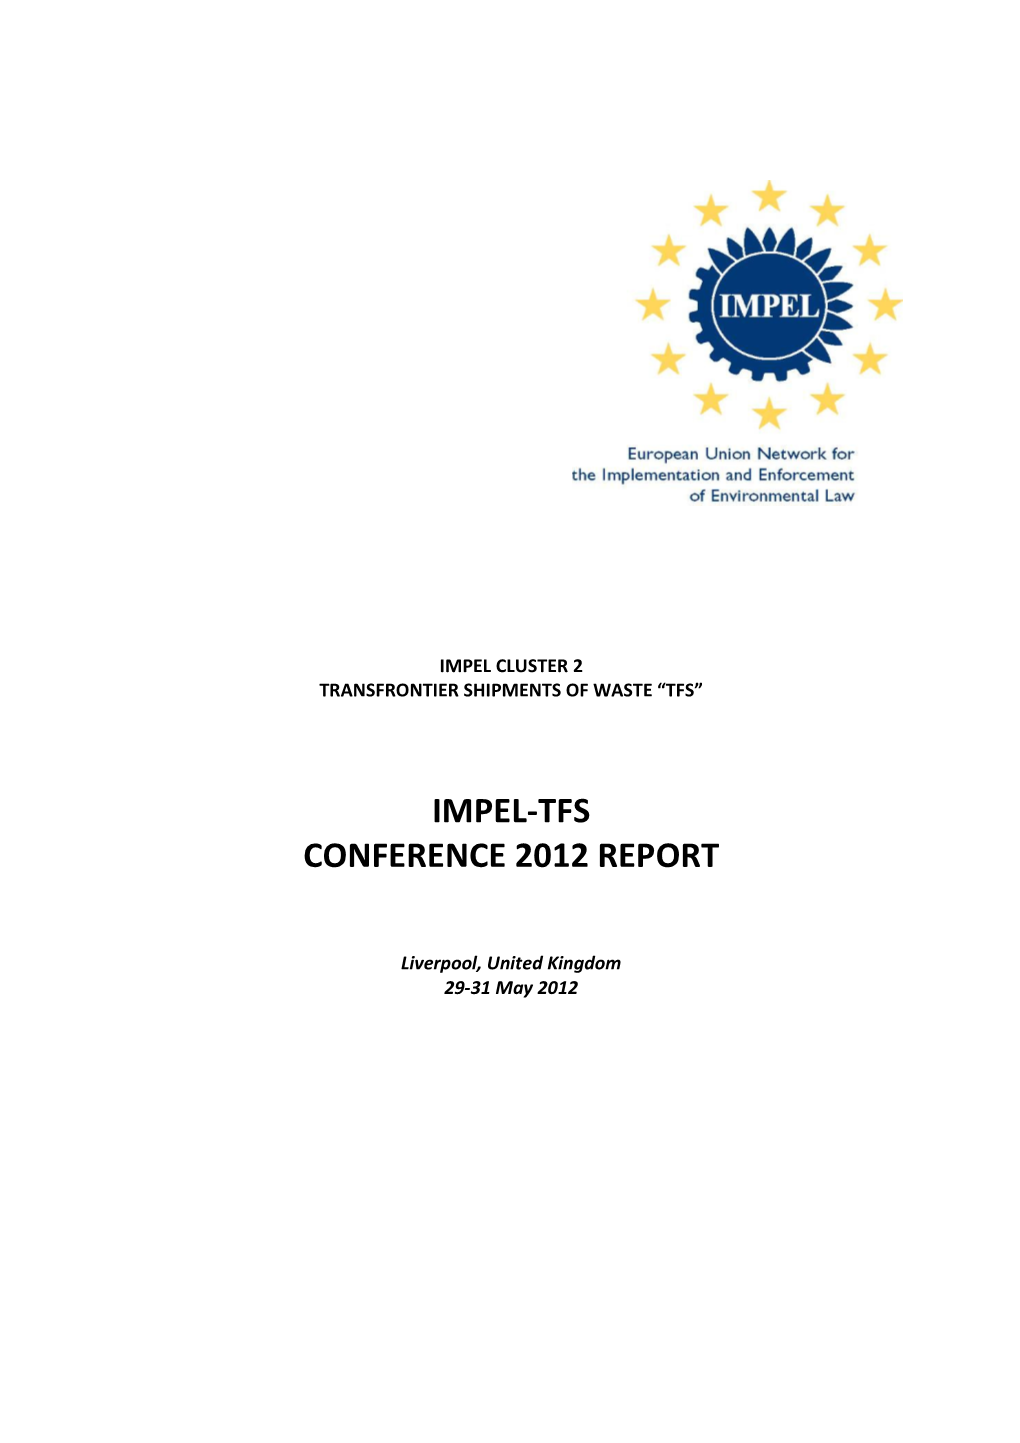 Impel-Tfs Conference 2012 Report